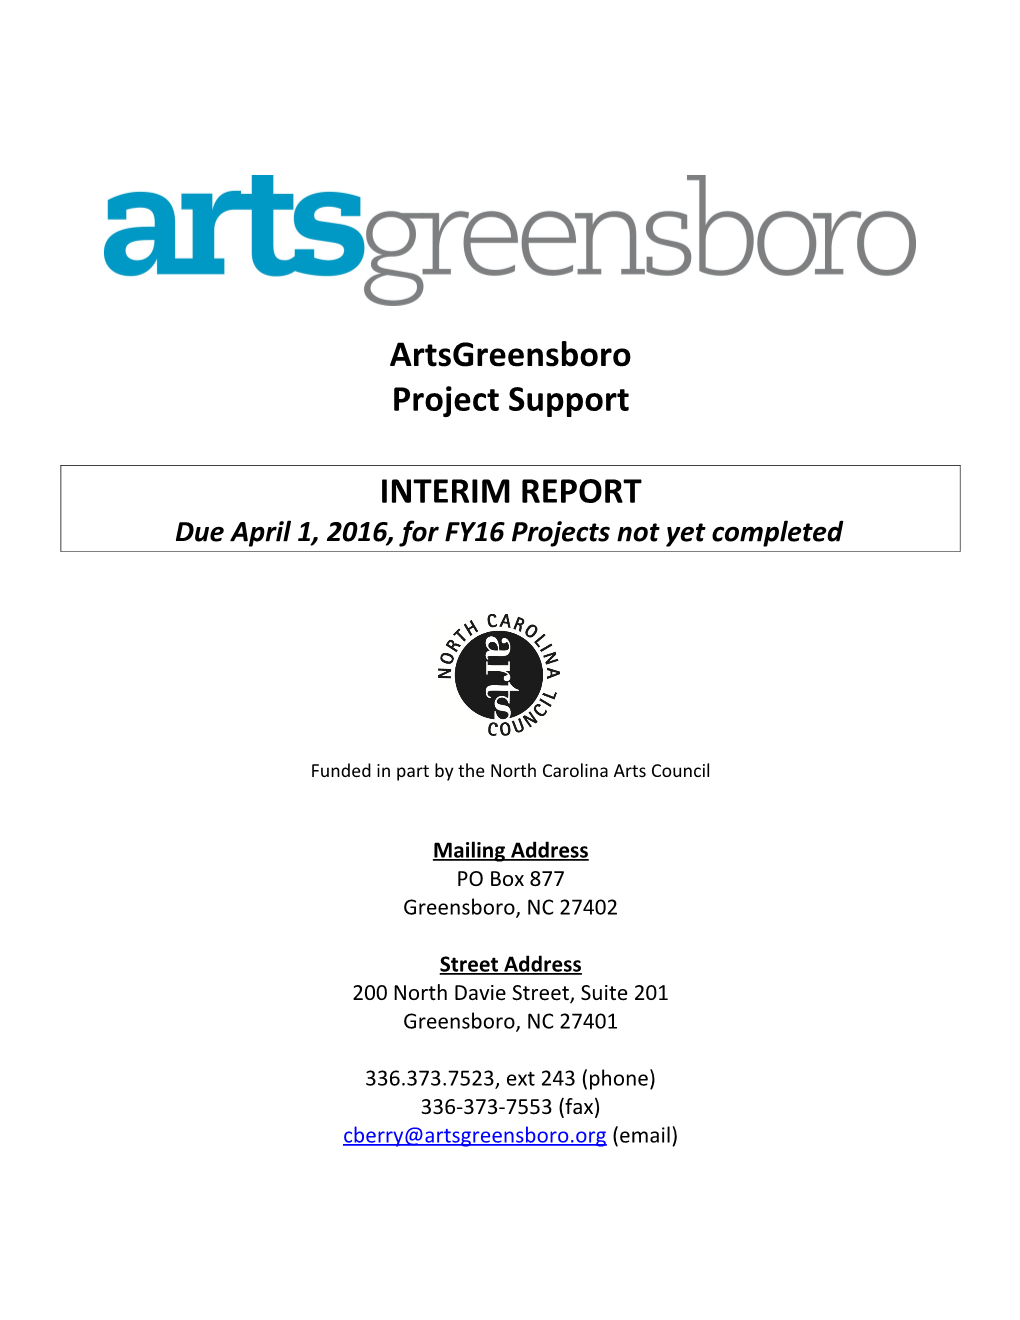 United Arts Council of Greater Greensboro